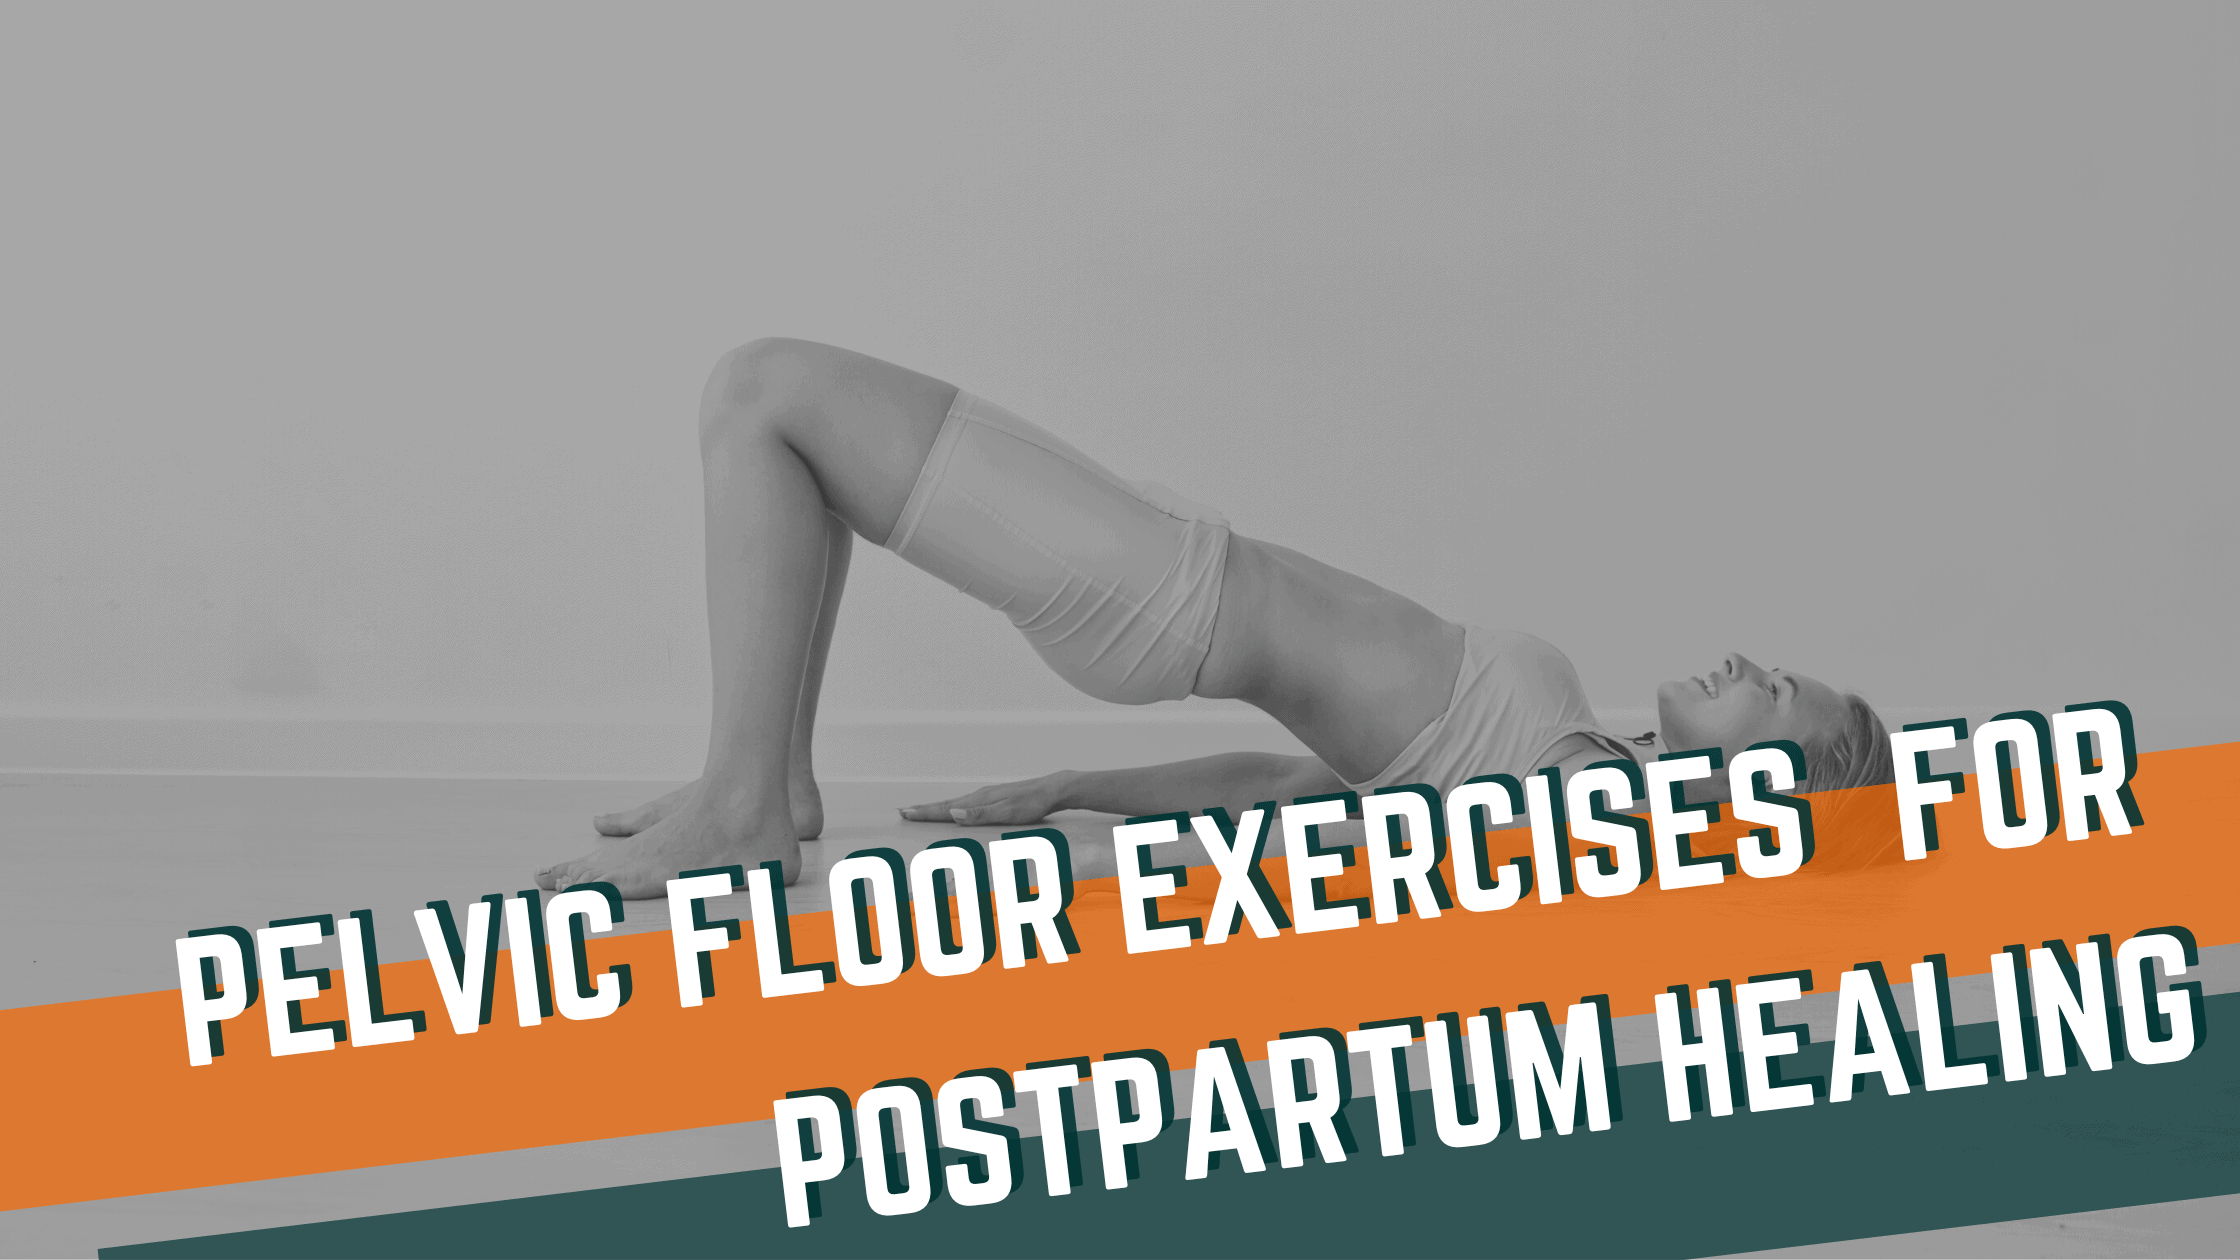 Featured image for “Reconnect to the CORE Postpartum: Pelvic Floor Exercises for Postpartum Healing”